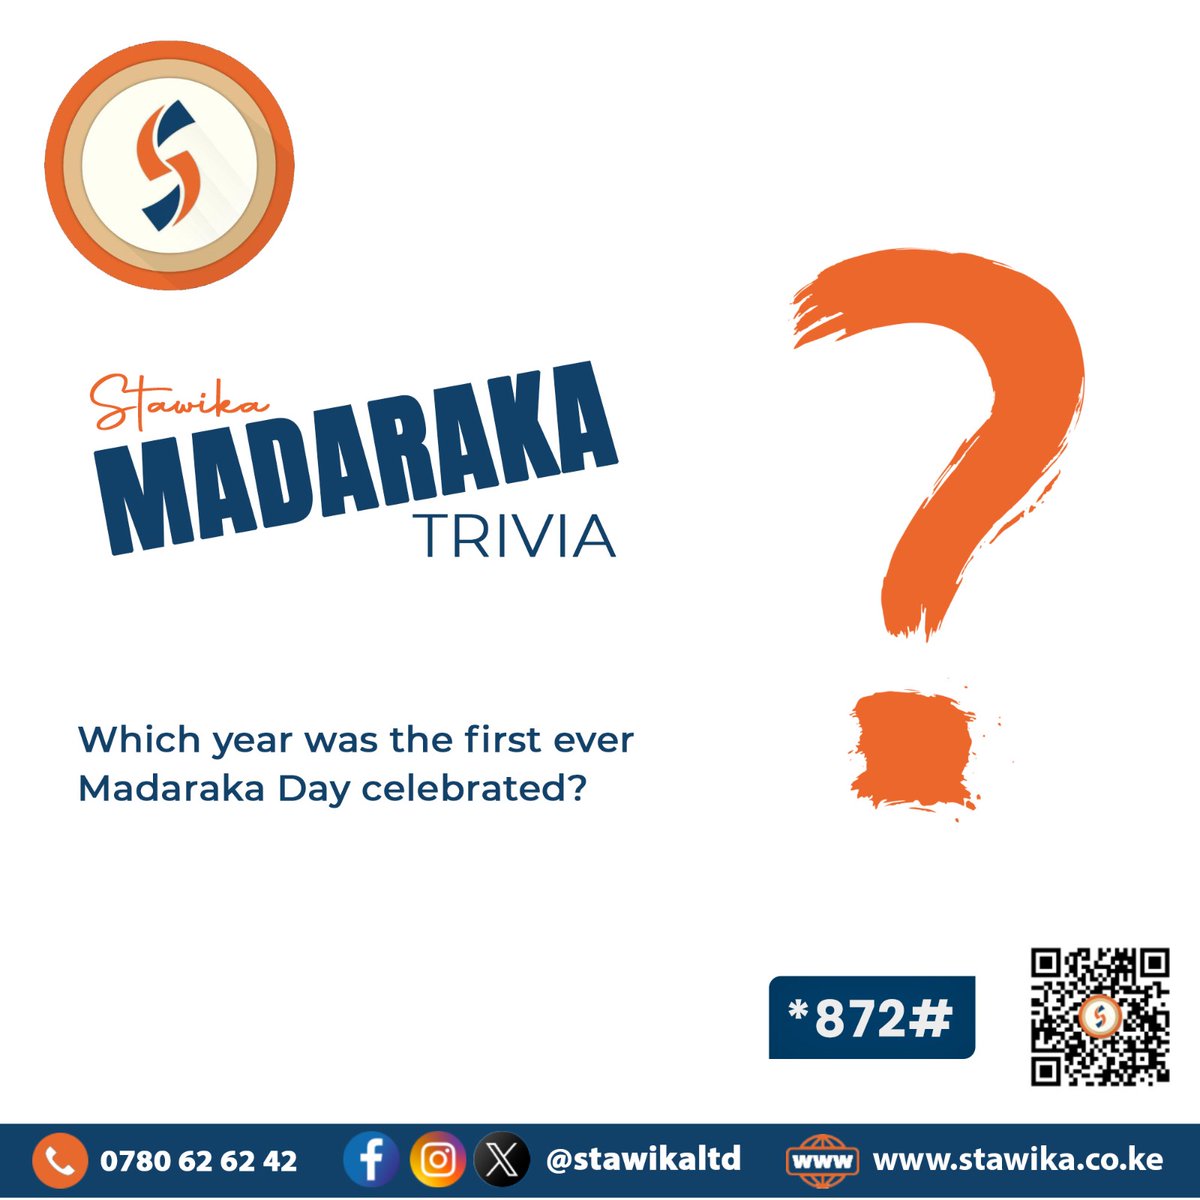 THIS IS HISTORY RIGHT HERE, THIS IS HISTORY.

Get a chance to win airtime, a shopping voucher and merchandise by tackling our MADARAKA Trivia.

Who knows the year? Let us know in the comments below.

#Stawika
#Nimestawika
#MadarakaDay